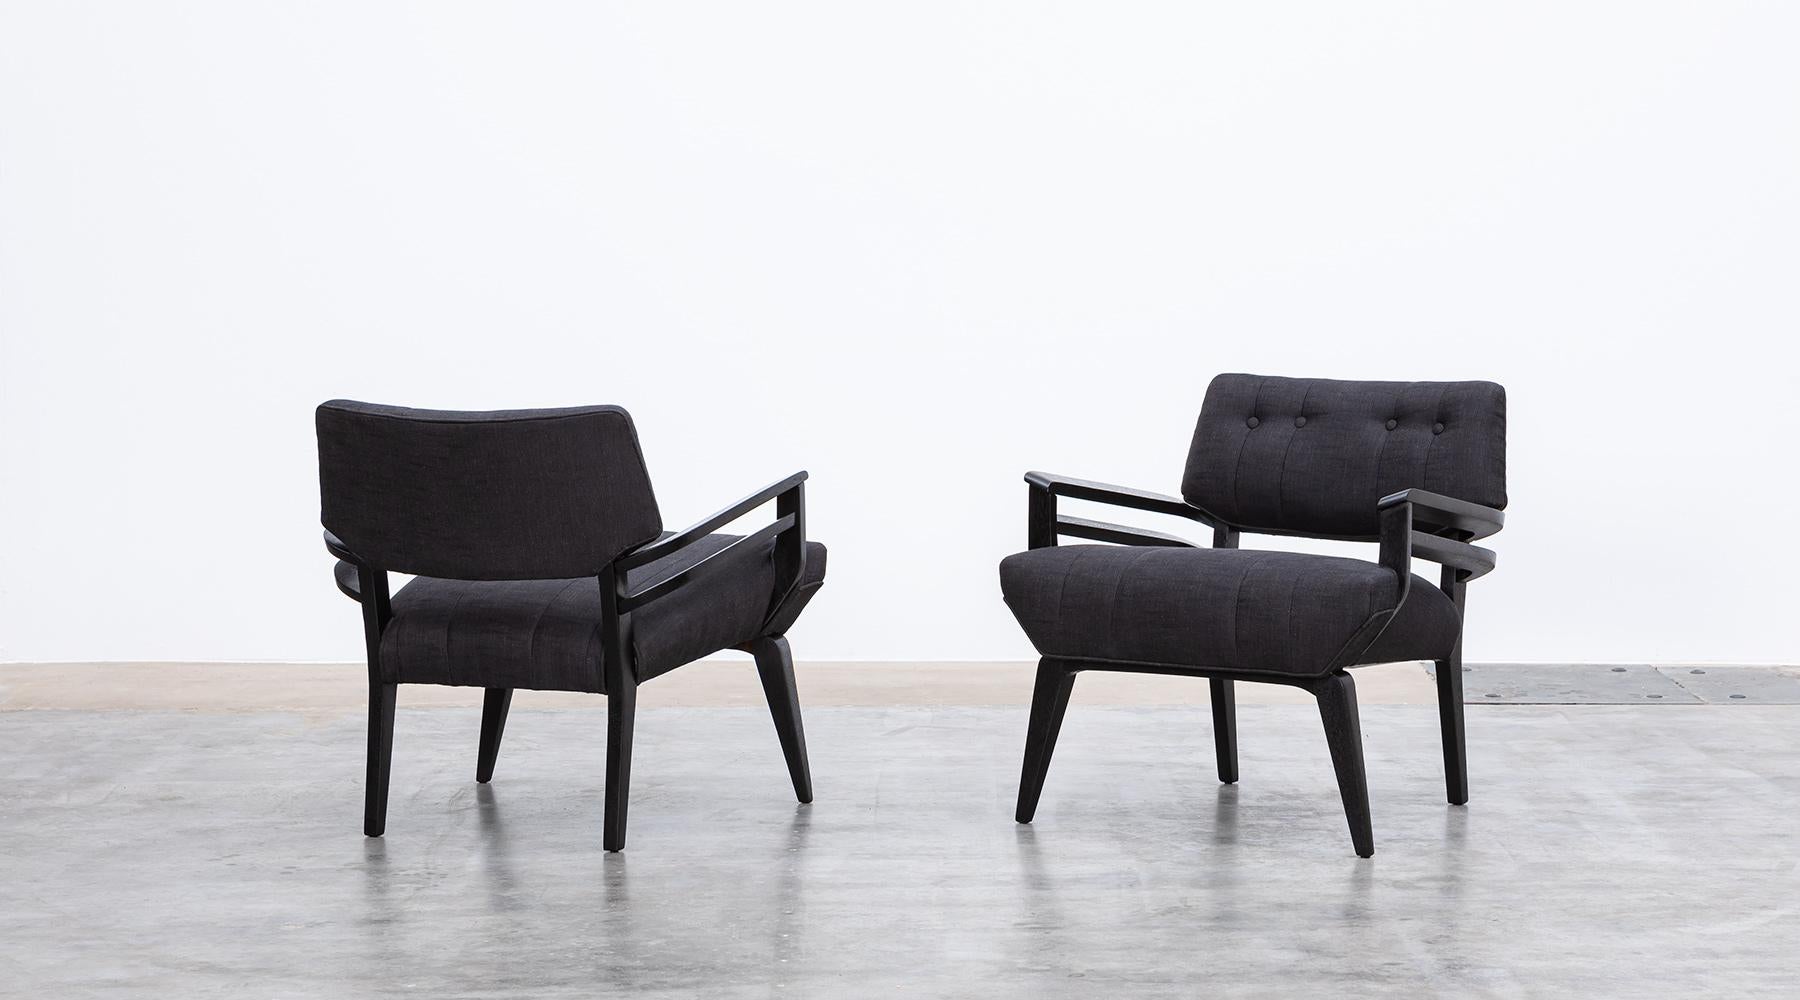 Matching lounge chairs, black lacquered wood, new upholstery, Paul Laszlo, USA, 1950.

These two pieces come in an extraordinary design by Paul Laszlo. Starting with the double armrests, the seat height and the construction of the legs.The Lounge